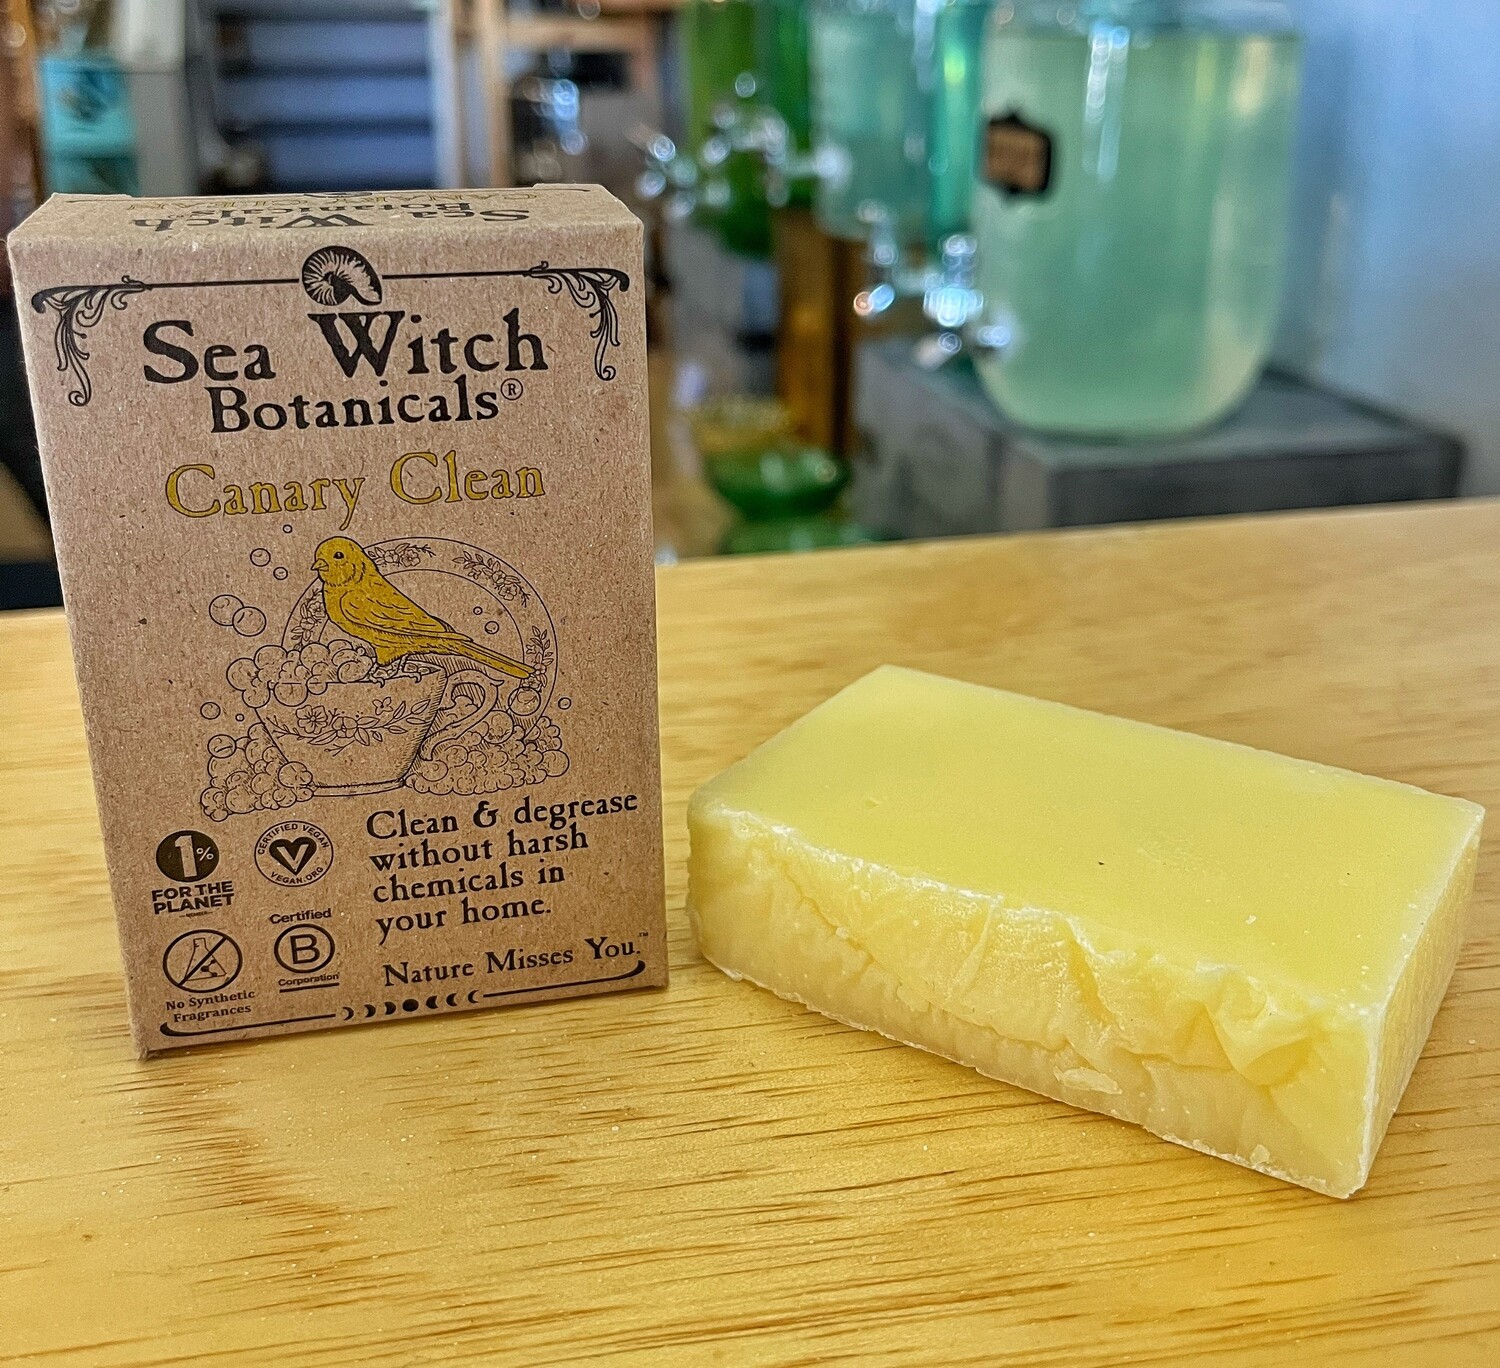 Canary Clean Bar - Sea Witch Botanicals